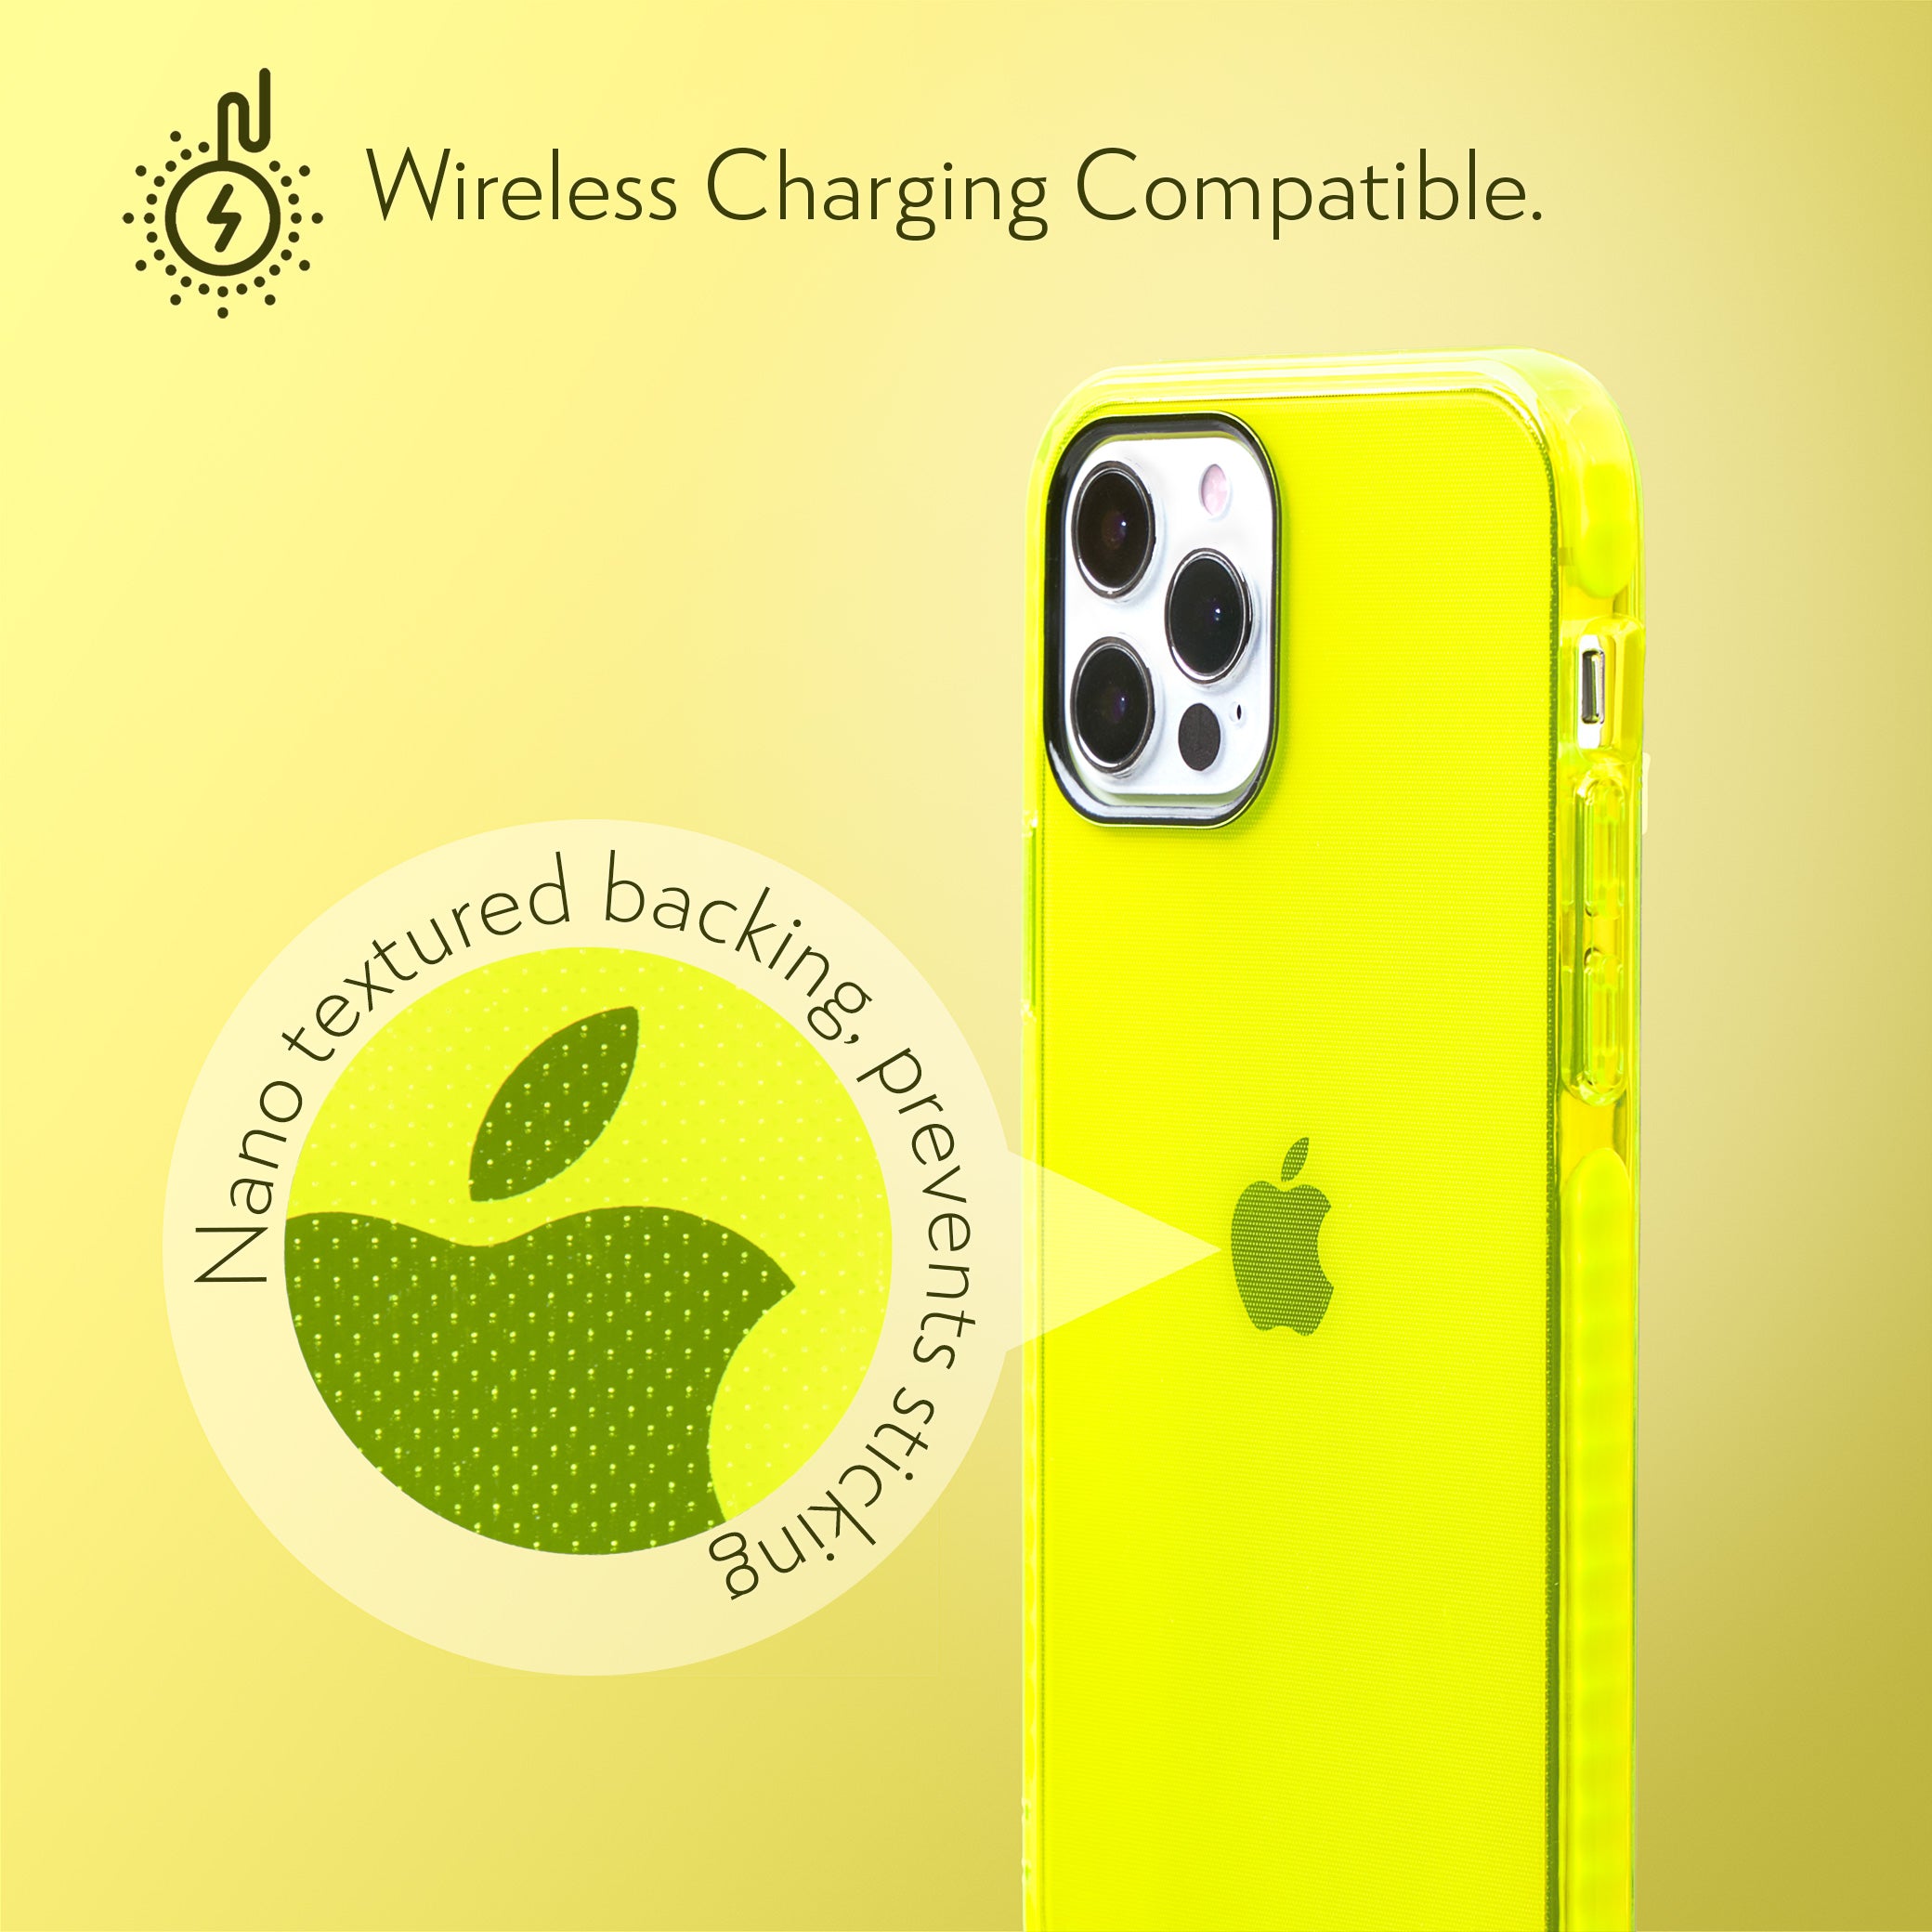 Barrier Case for iPhone 12 Pro Max - Hi Energy Neon Yellow